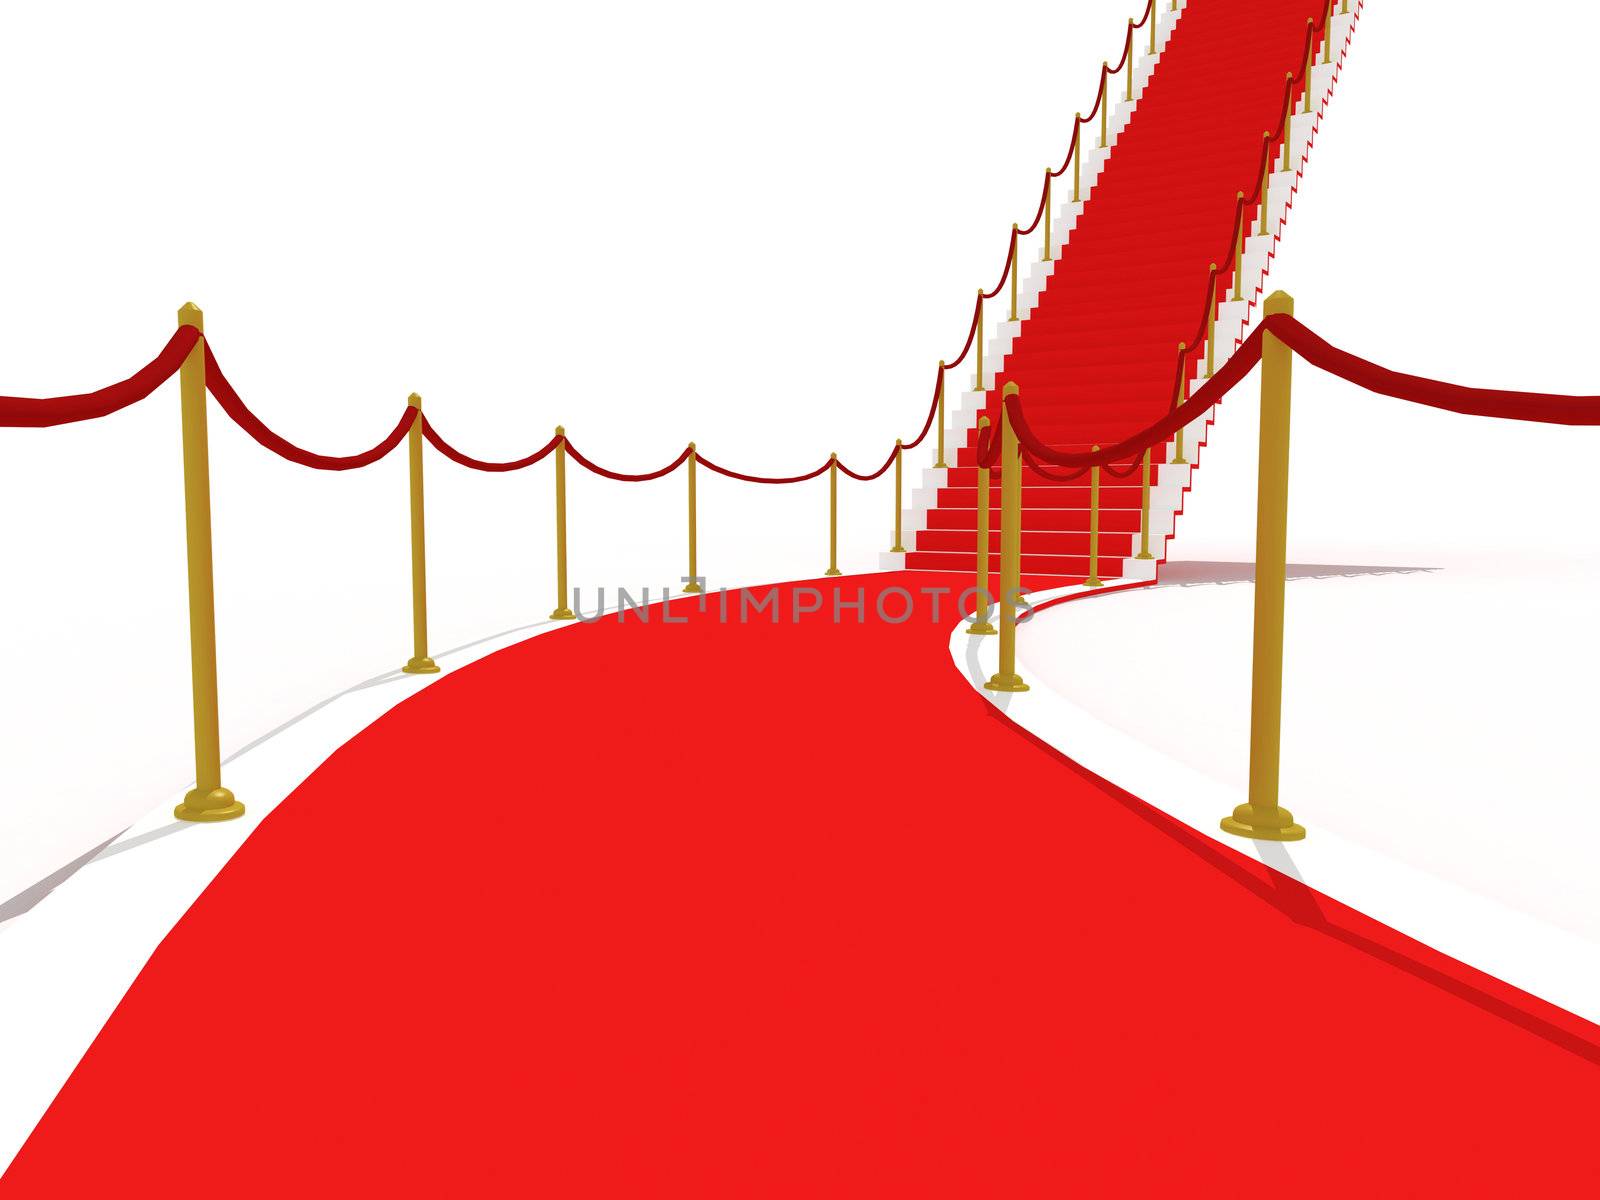 image on the staircase with red carpet, illuminated by dacasdo